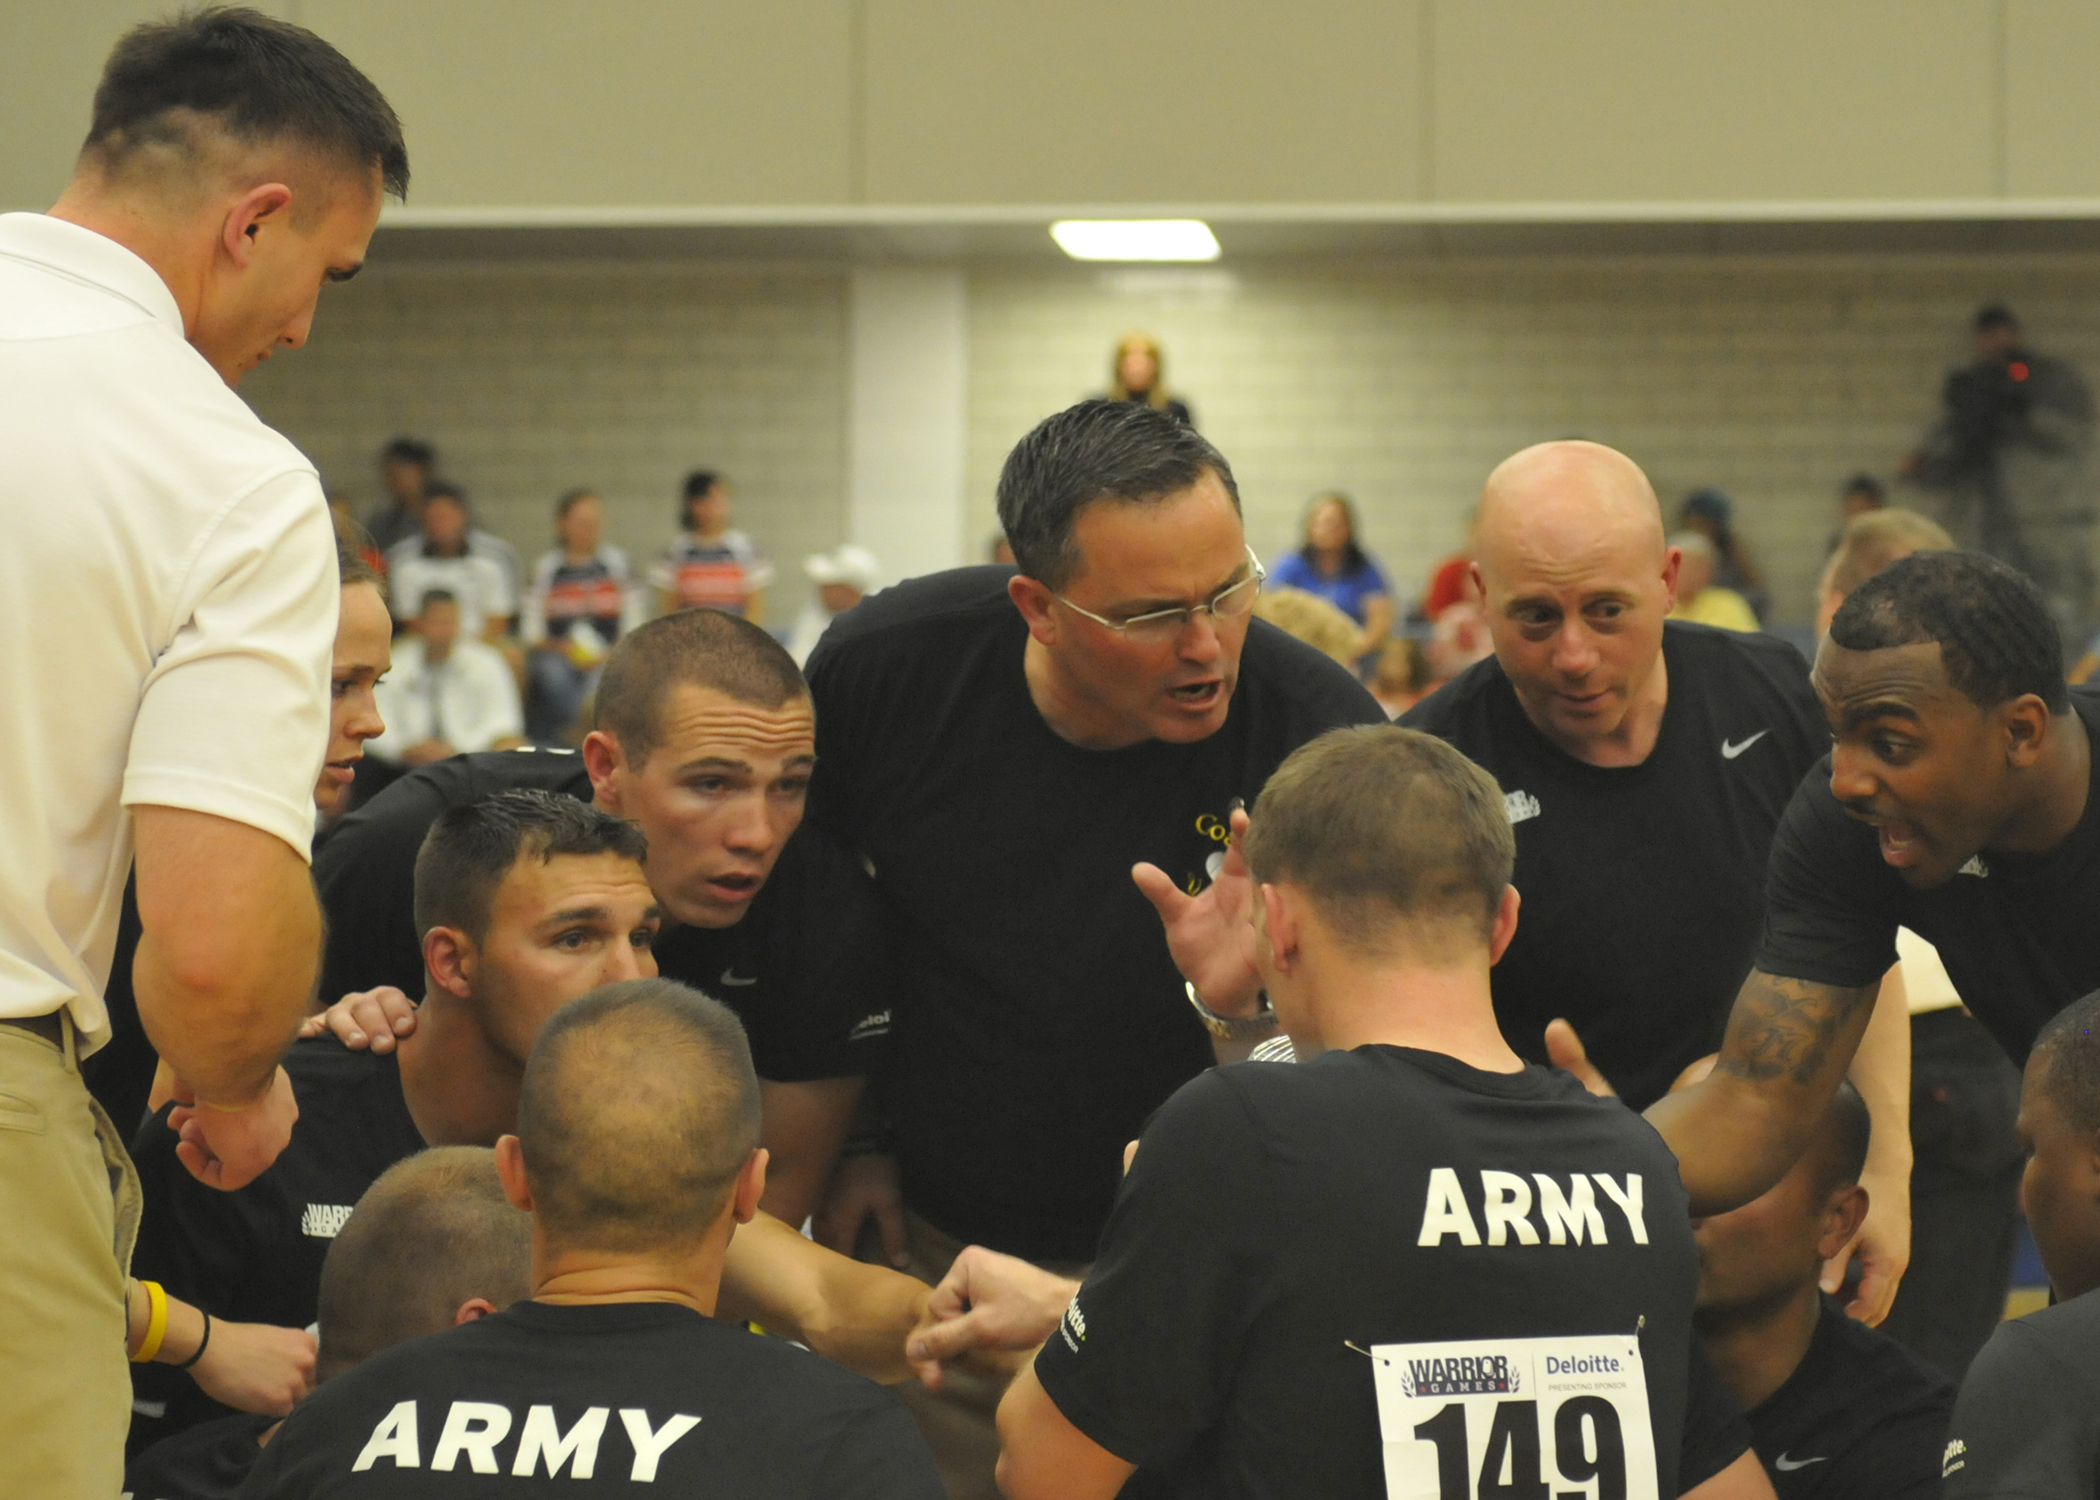 Army CPT David Vendt, U.S. Army sitting volleyball coach, pulls his team together to discuss strategy during the first set against the U.S. Navy at the 2012 Warrior Games on May 1, 2012 in Colorado Springs, Colorado.